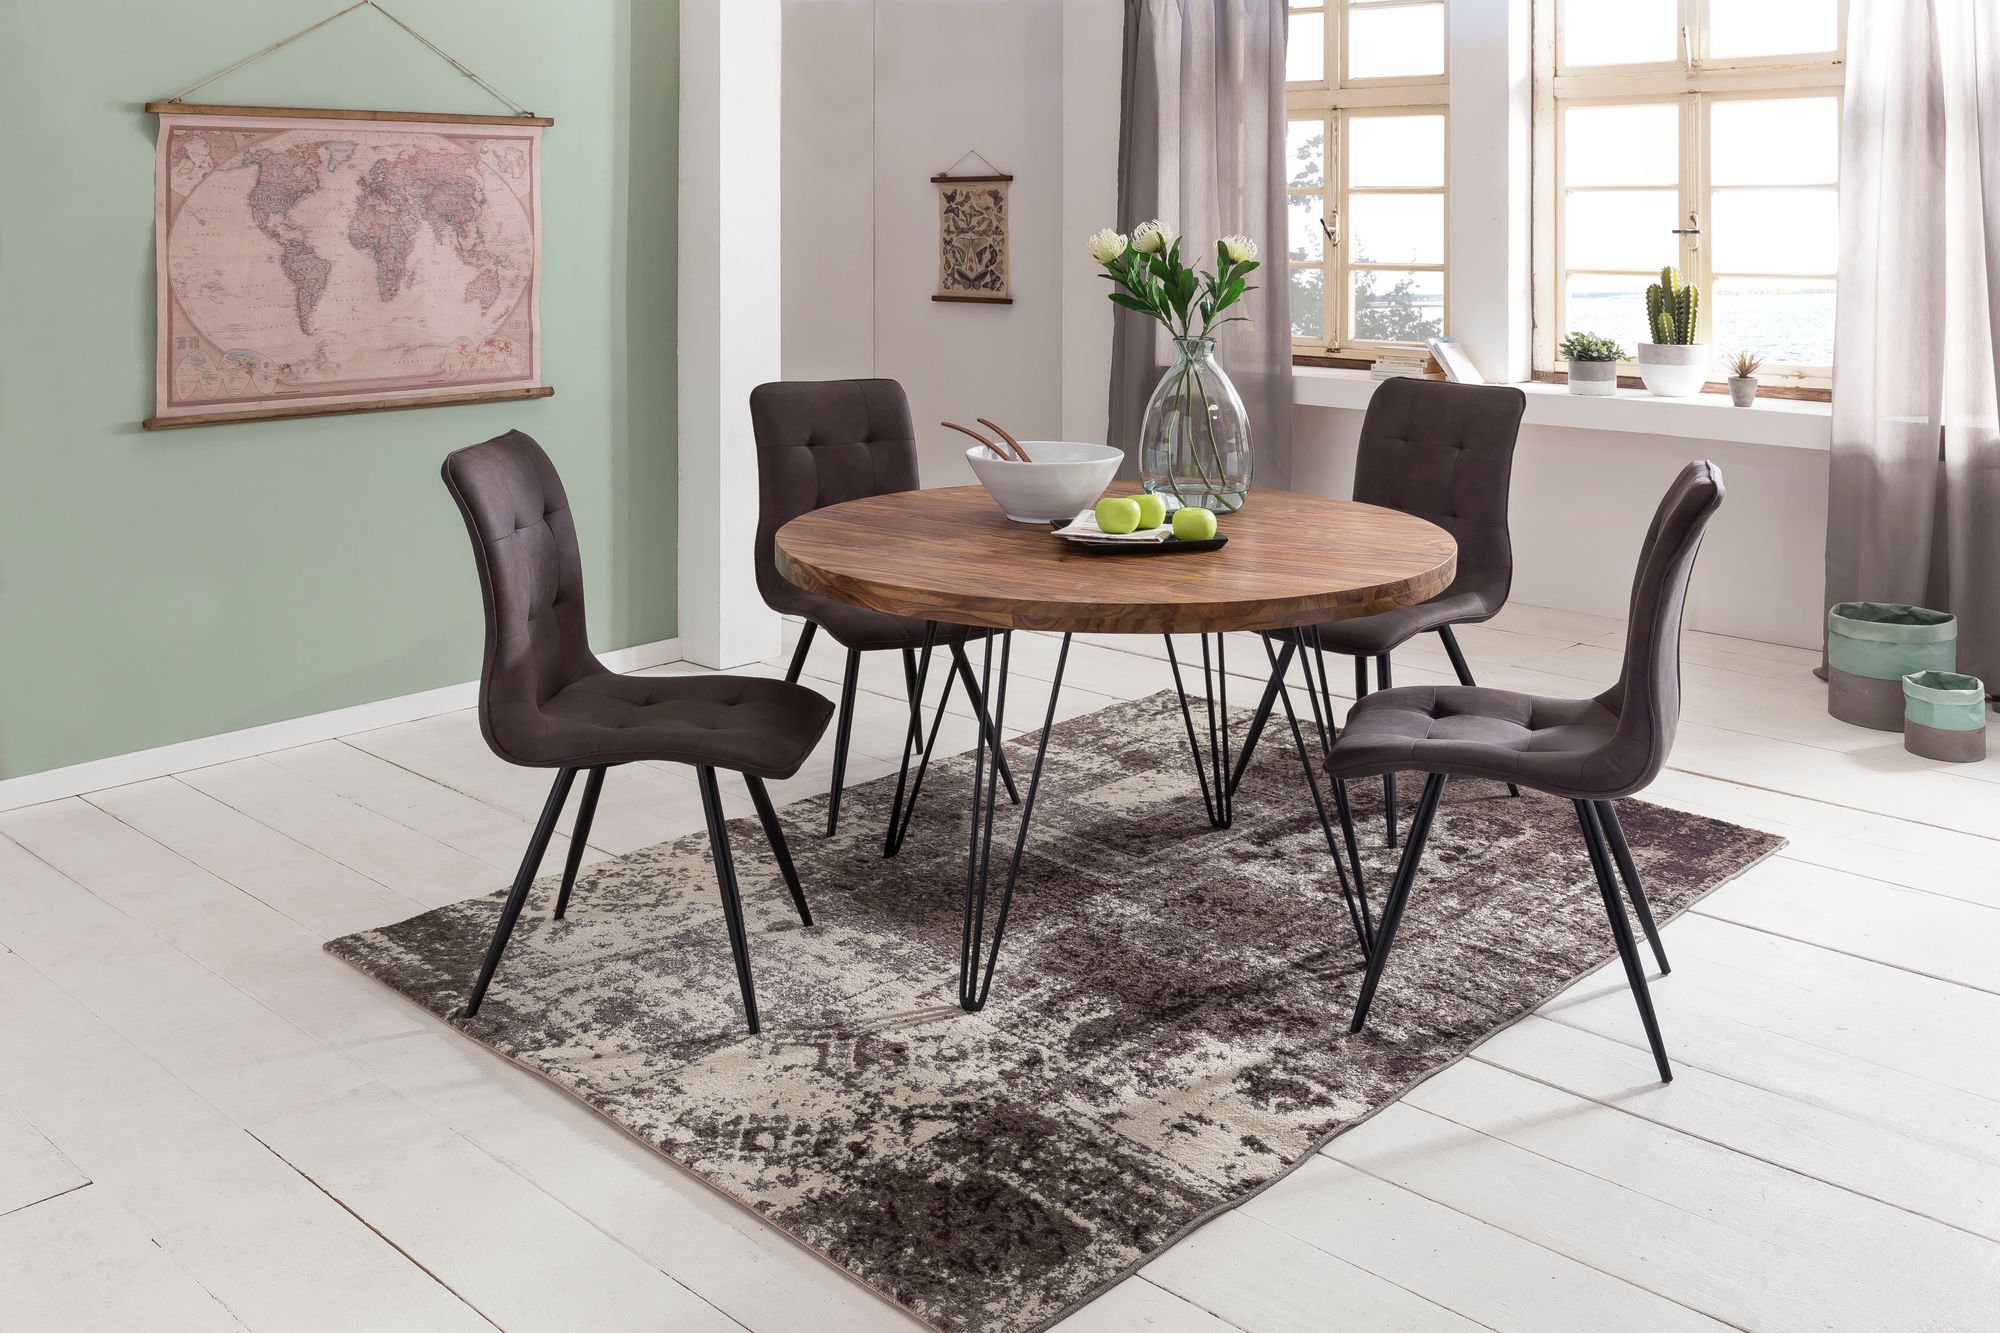 Design Dining Room Table Bagli Round Ø, 120 Long Dining Room Table